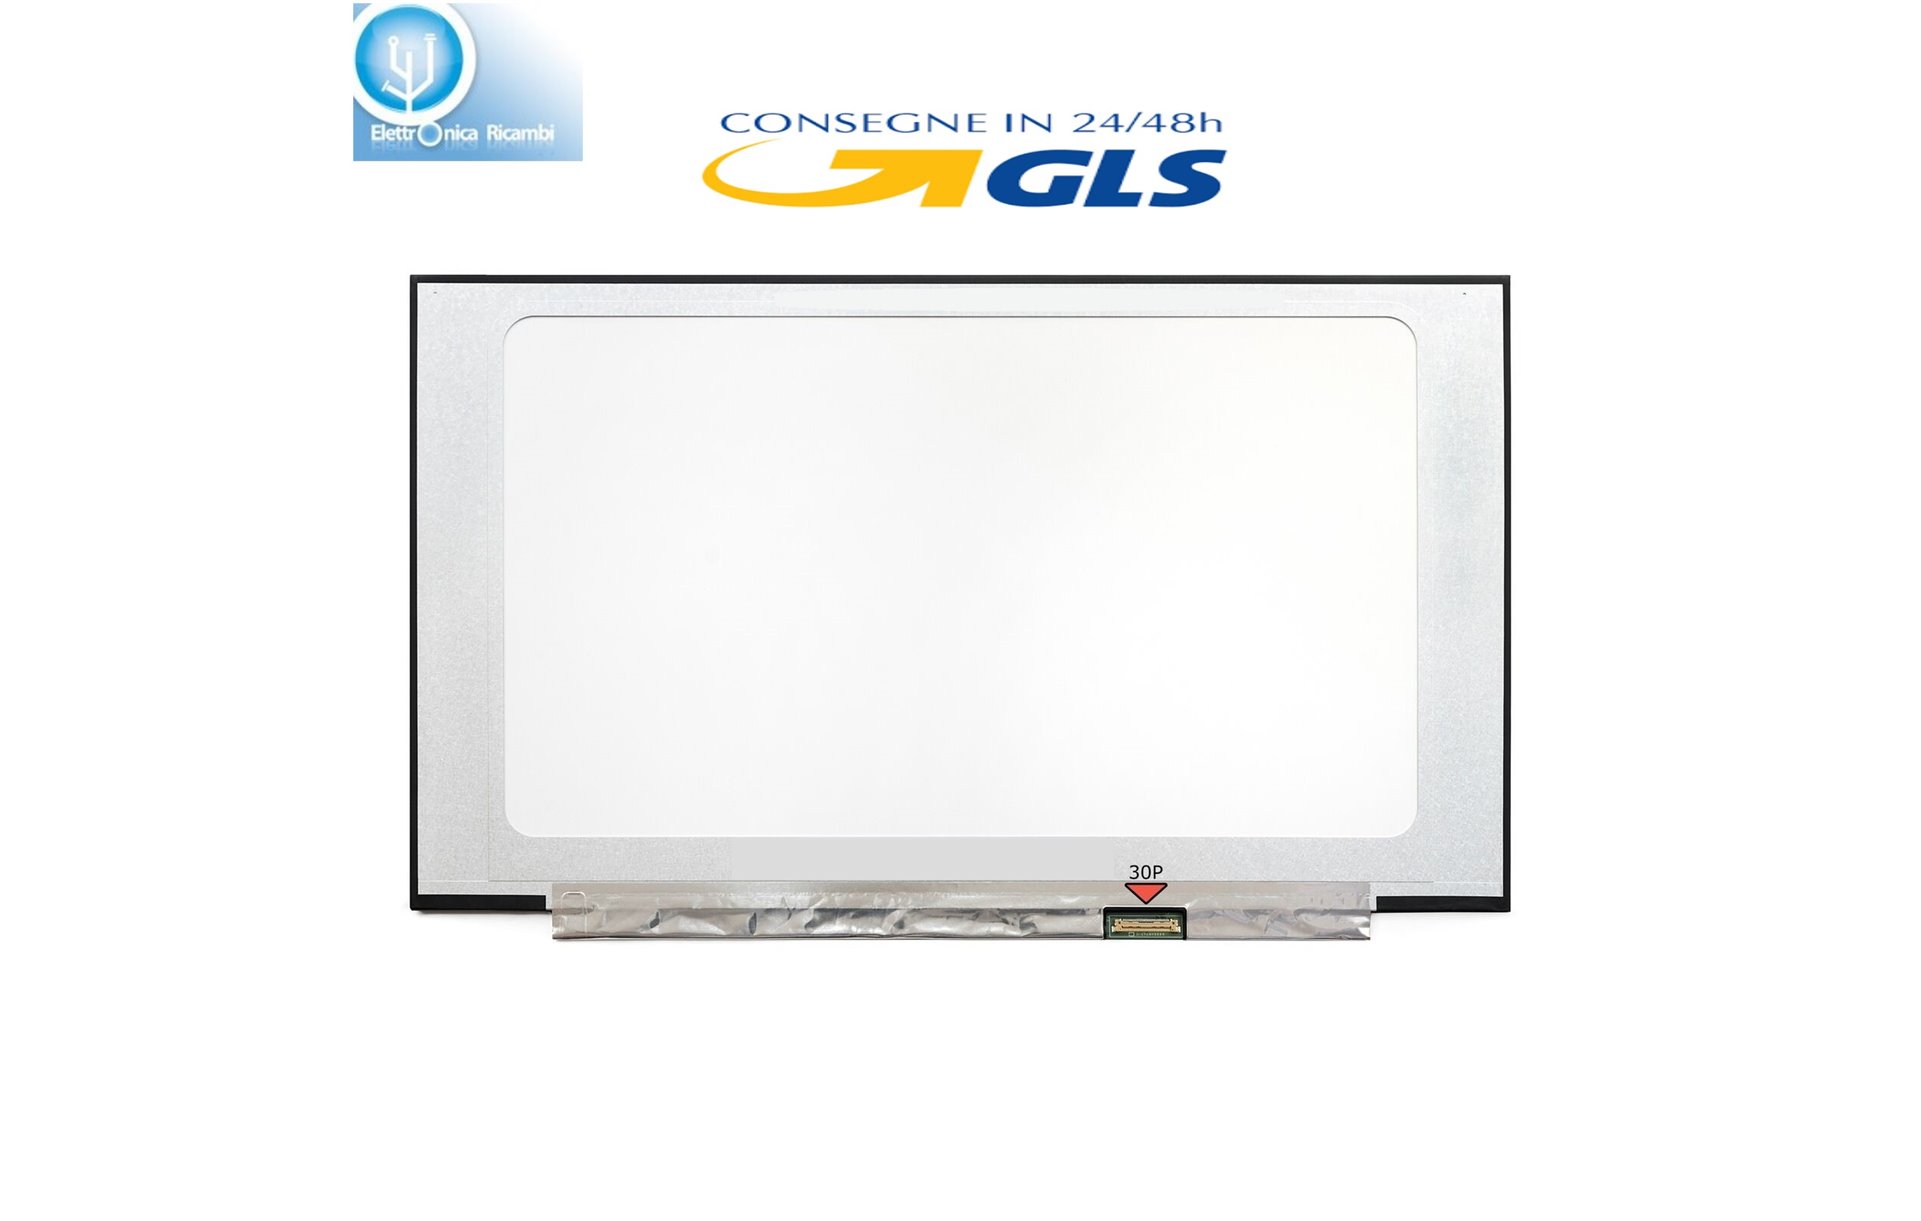 DISPLAY LCD Schermo ASUS X545 SERIES 15,6" (13.6"x7.6") LED 30 pin  IPS